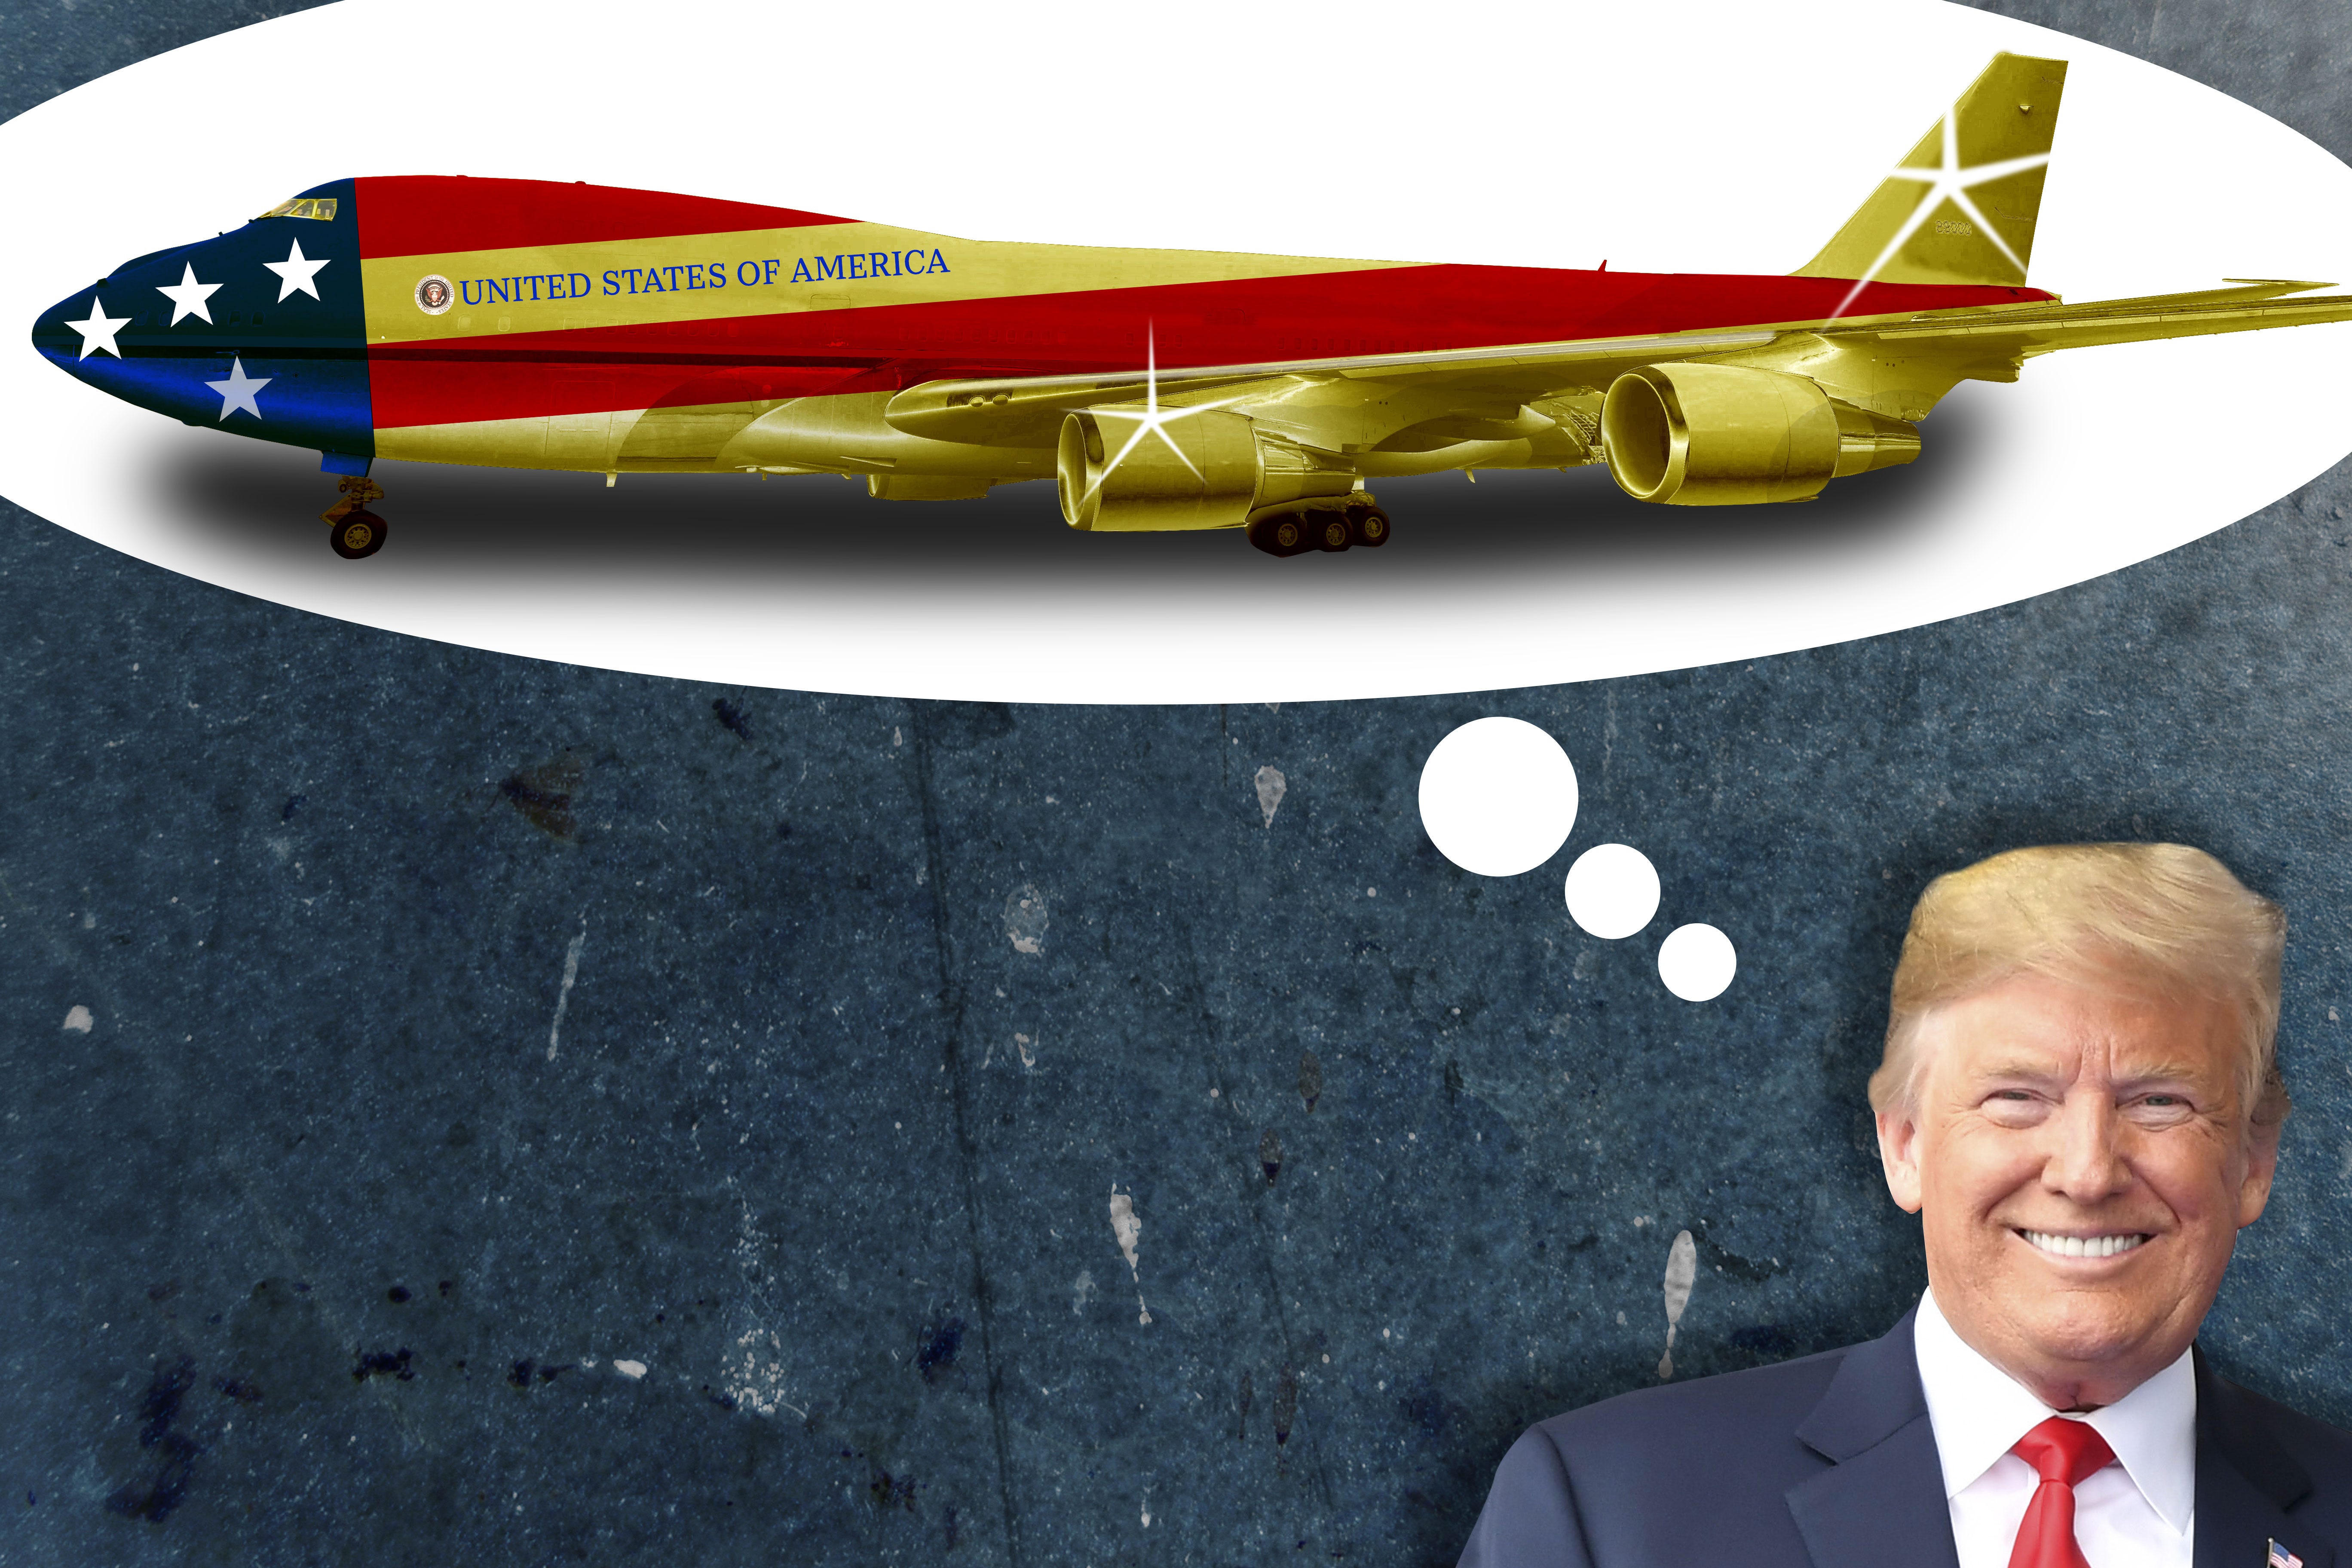 Here's what a new Air Force One design could look like